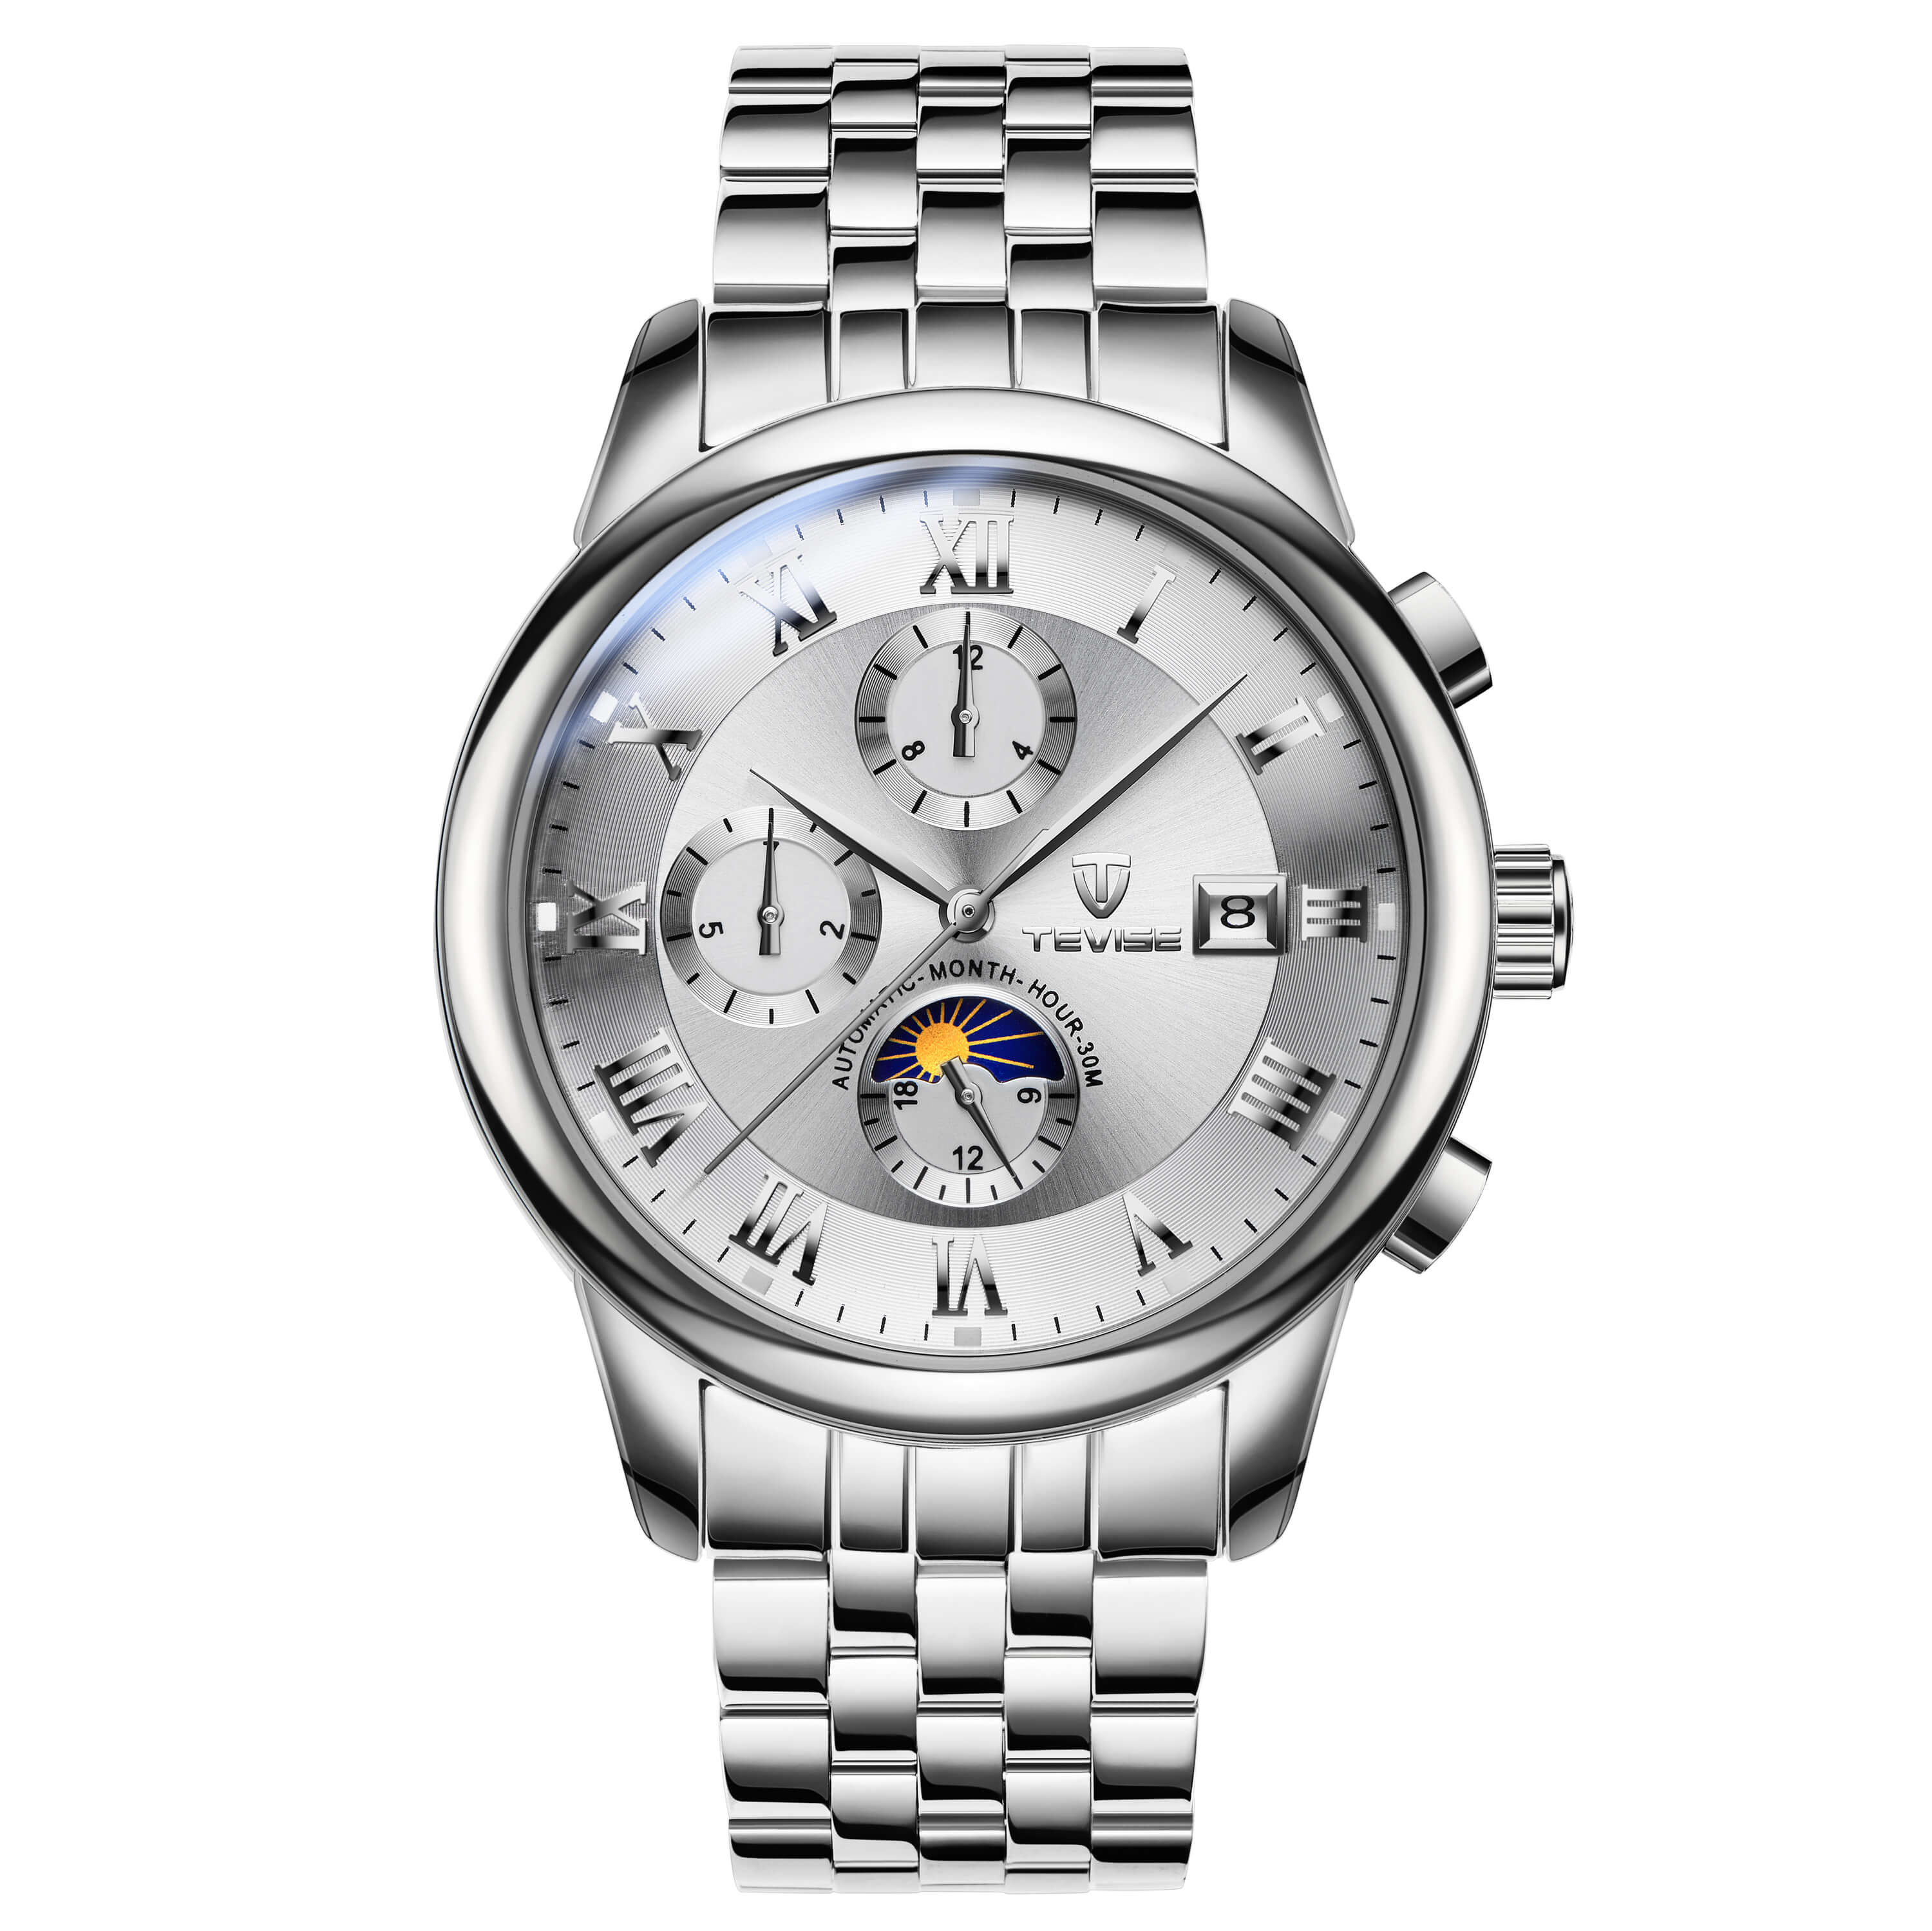 TEVISE 9008 Men's Automatic Mechanical Men's Watch Moon Phase Stainless Steel - Two Tone White